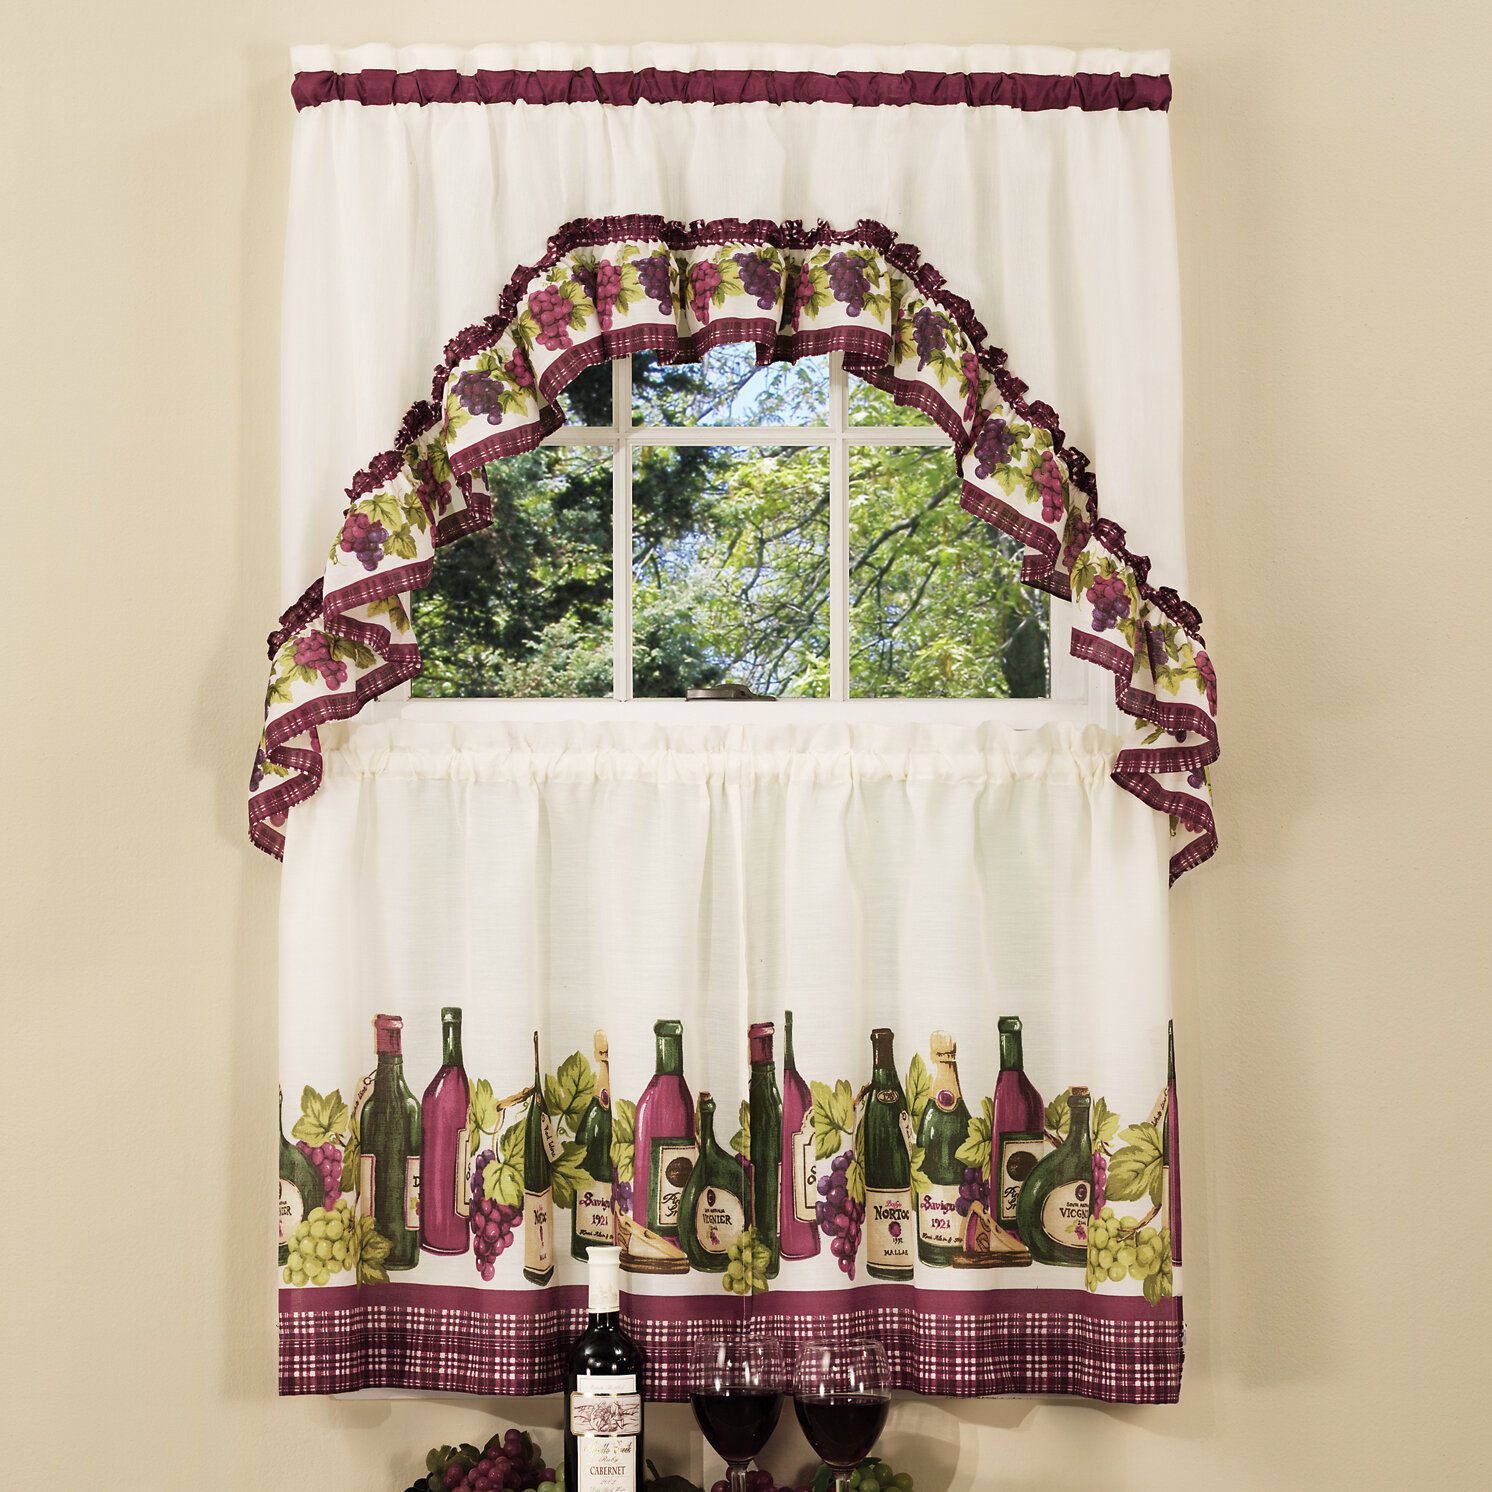 Chardonnay 57" Kitchen Curtain In Window Curtains Sets With Colorful Marketplace Vegetable And Sunflower Print (View 9 of 20)